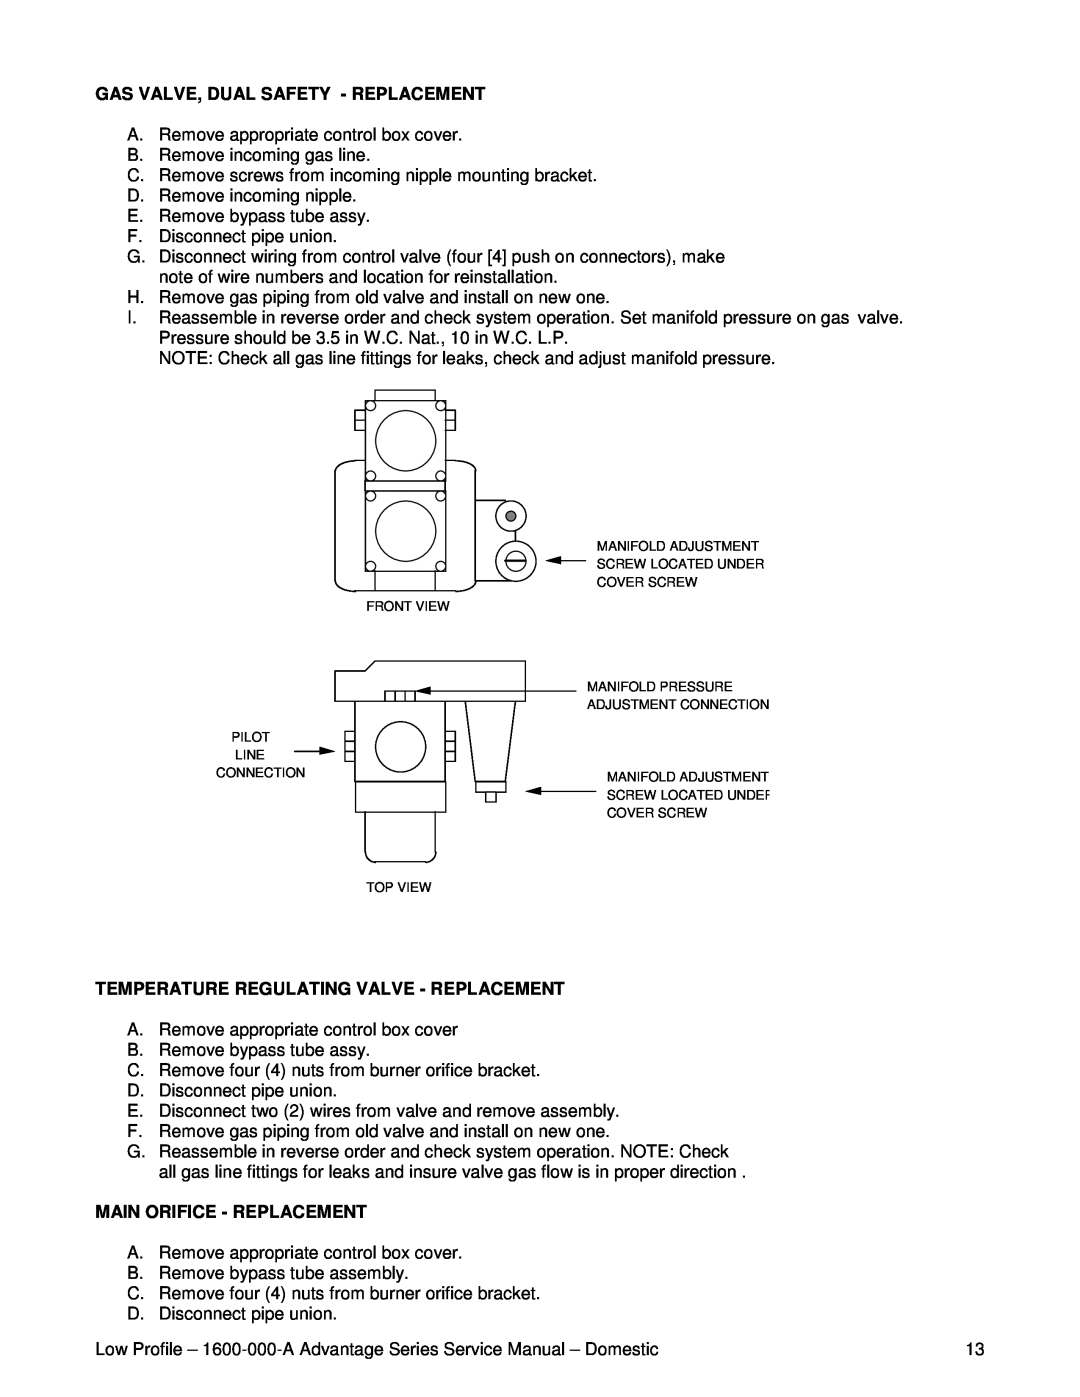 Lincoln 1600 Gas Valve, Dual Safety - Replacement, Temperature Regulating Valve - Replacement, Main Orifice - Replacement 